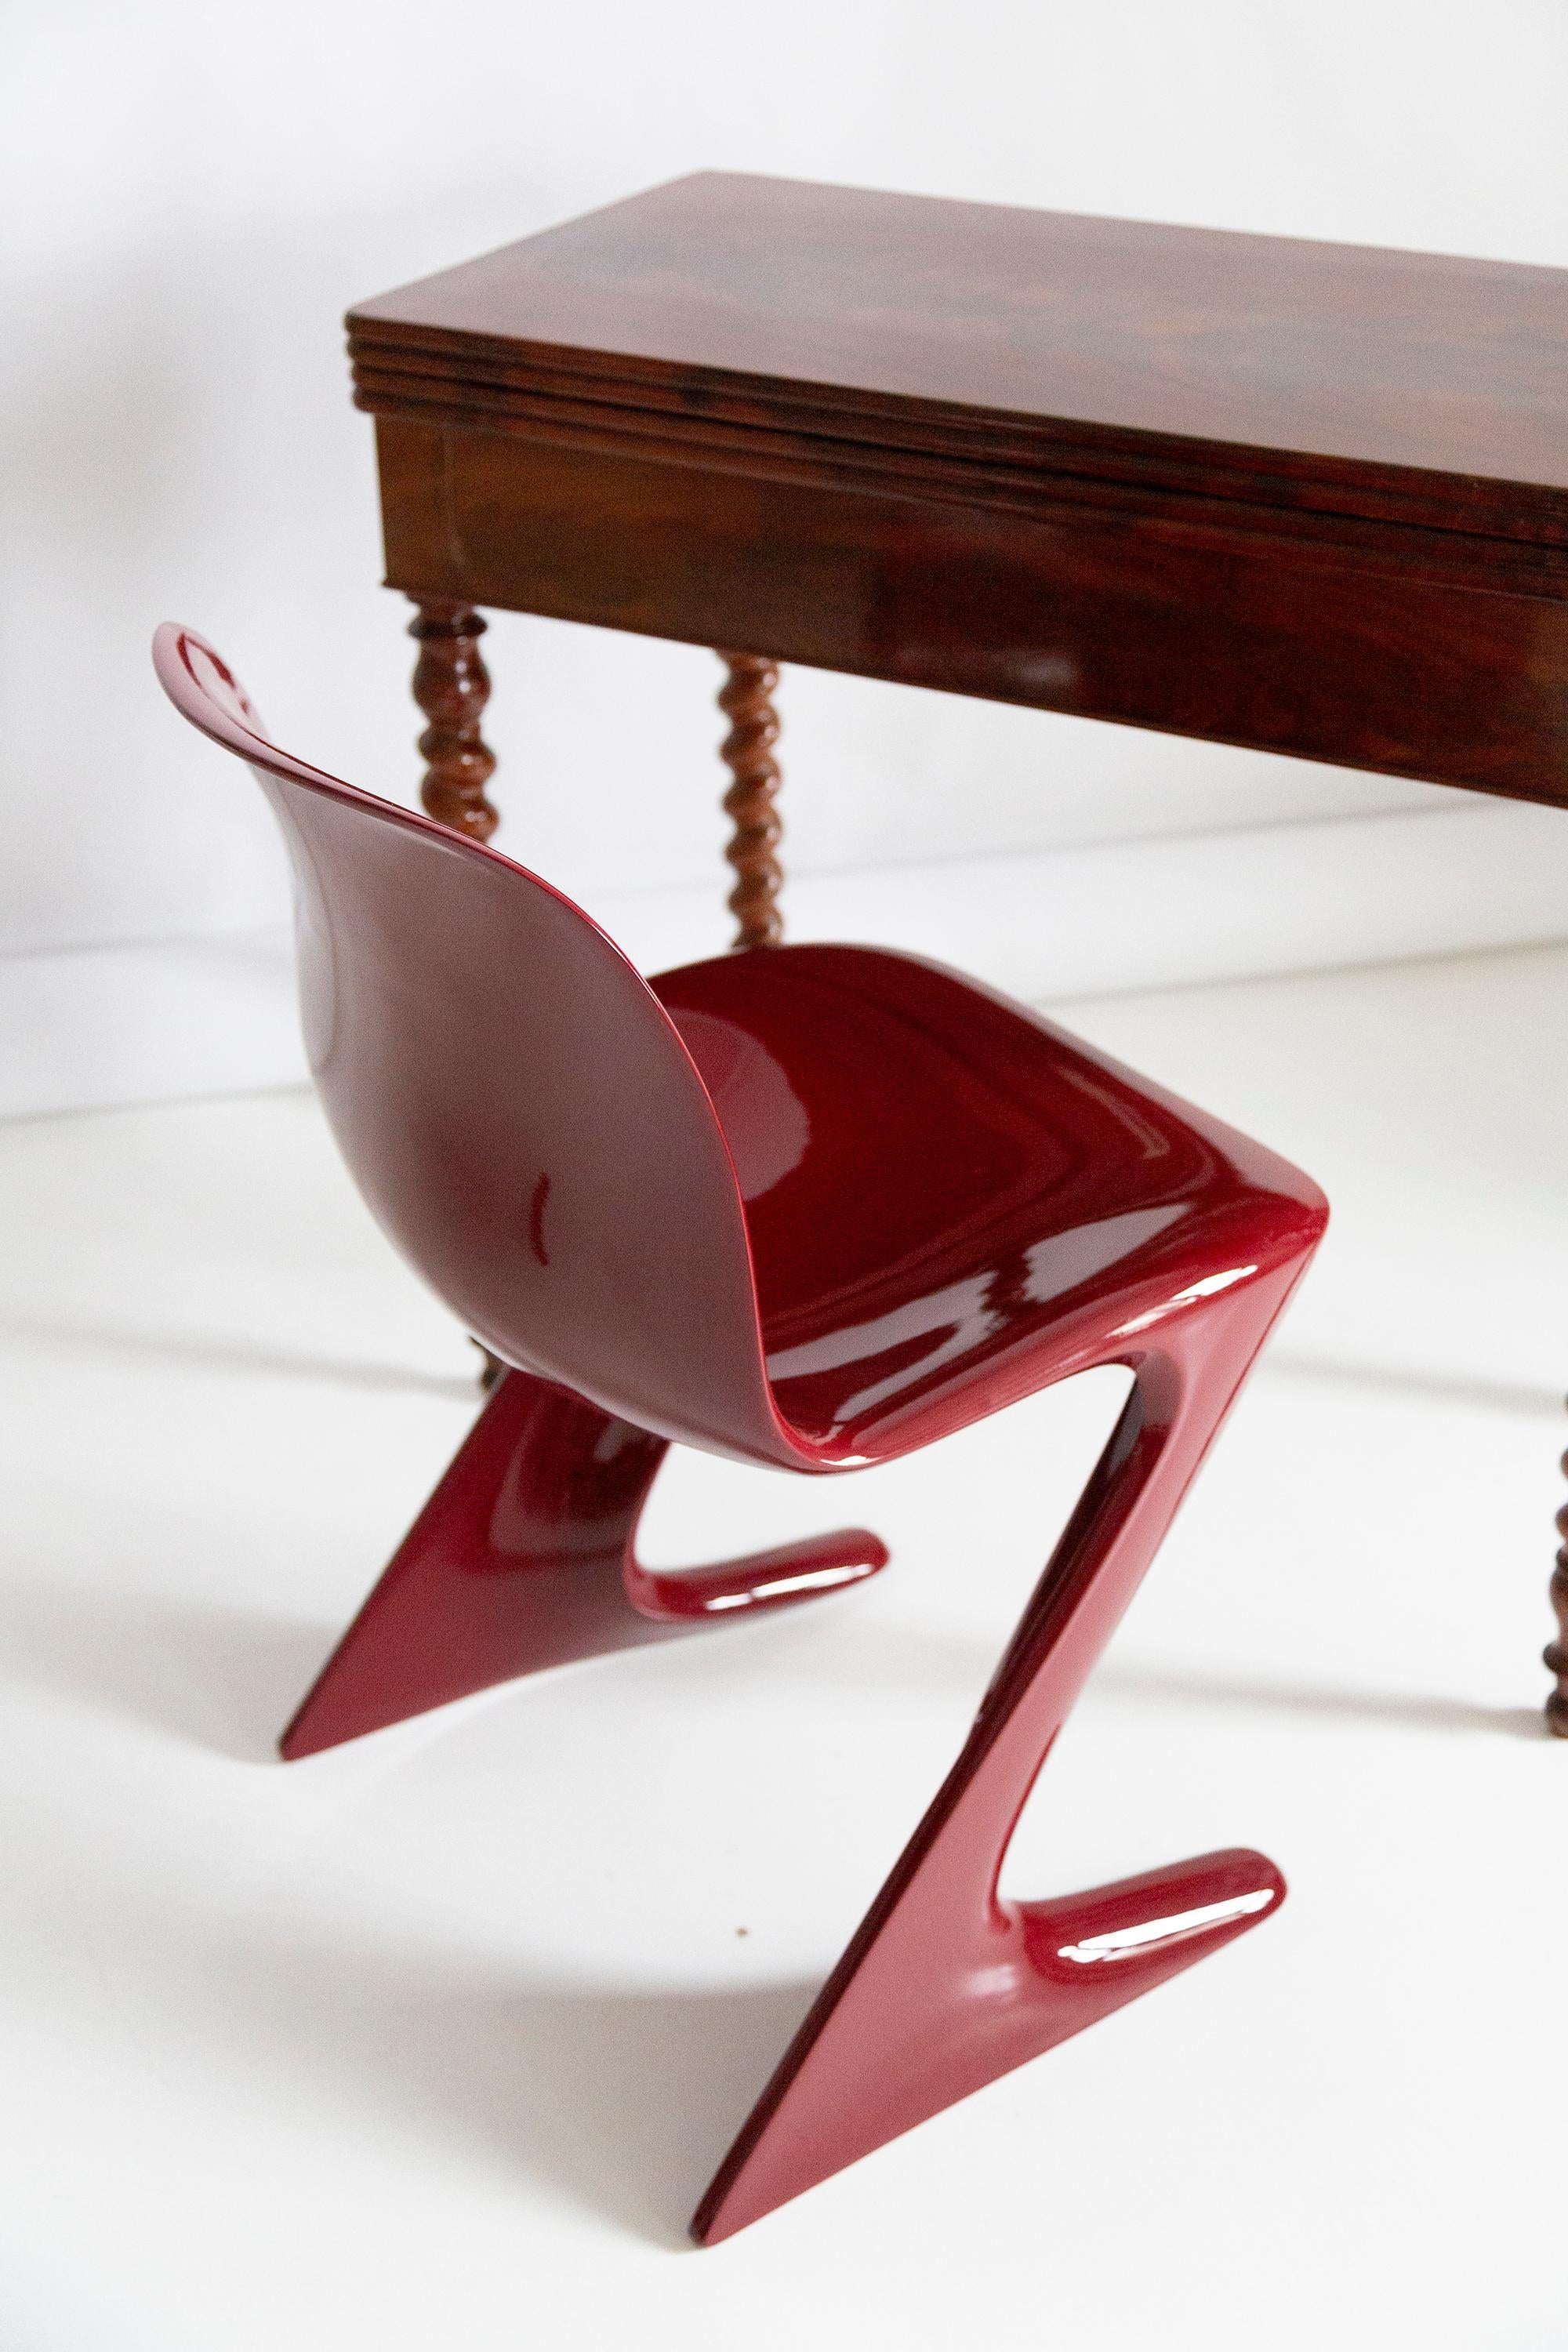 Pair of Dark Red Wine Kangaroo Chairs Designed by Ernst Moeckl, Germany, 1968 For Sale 8